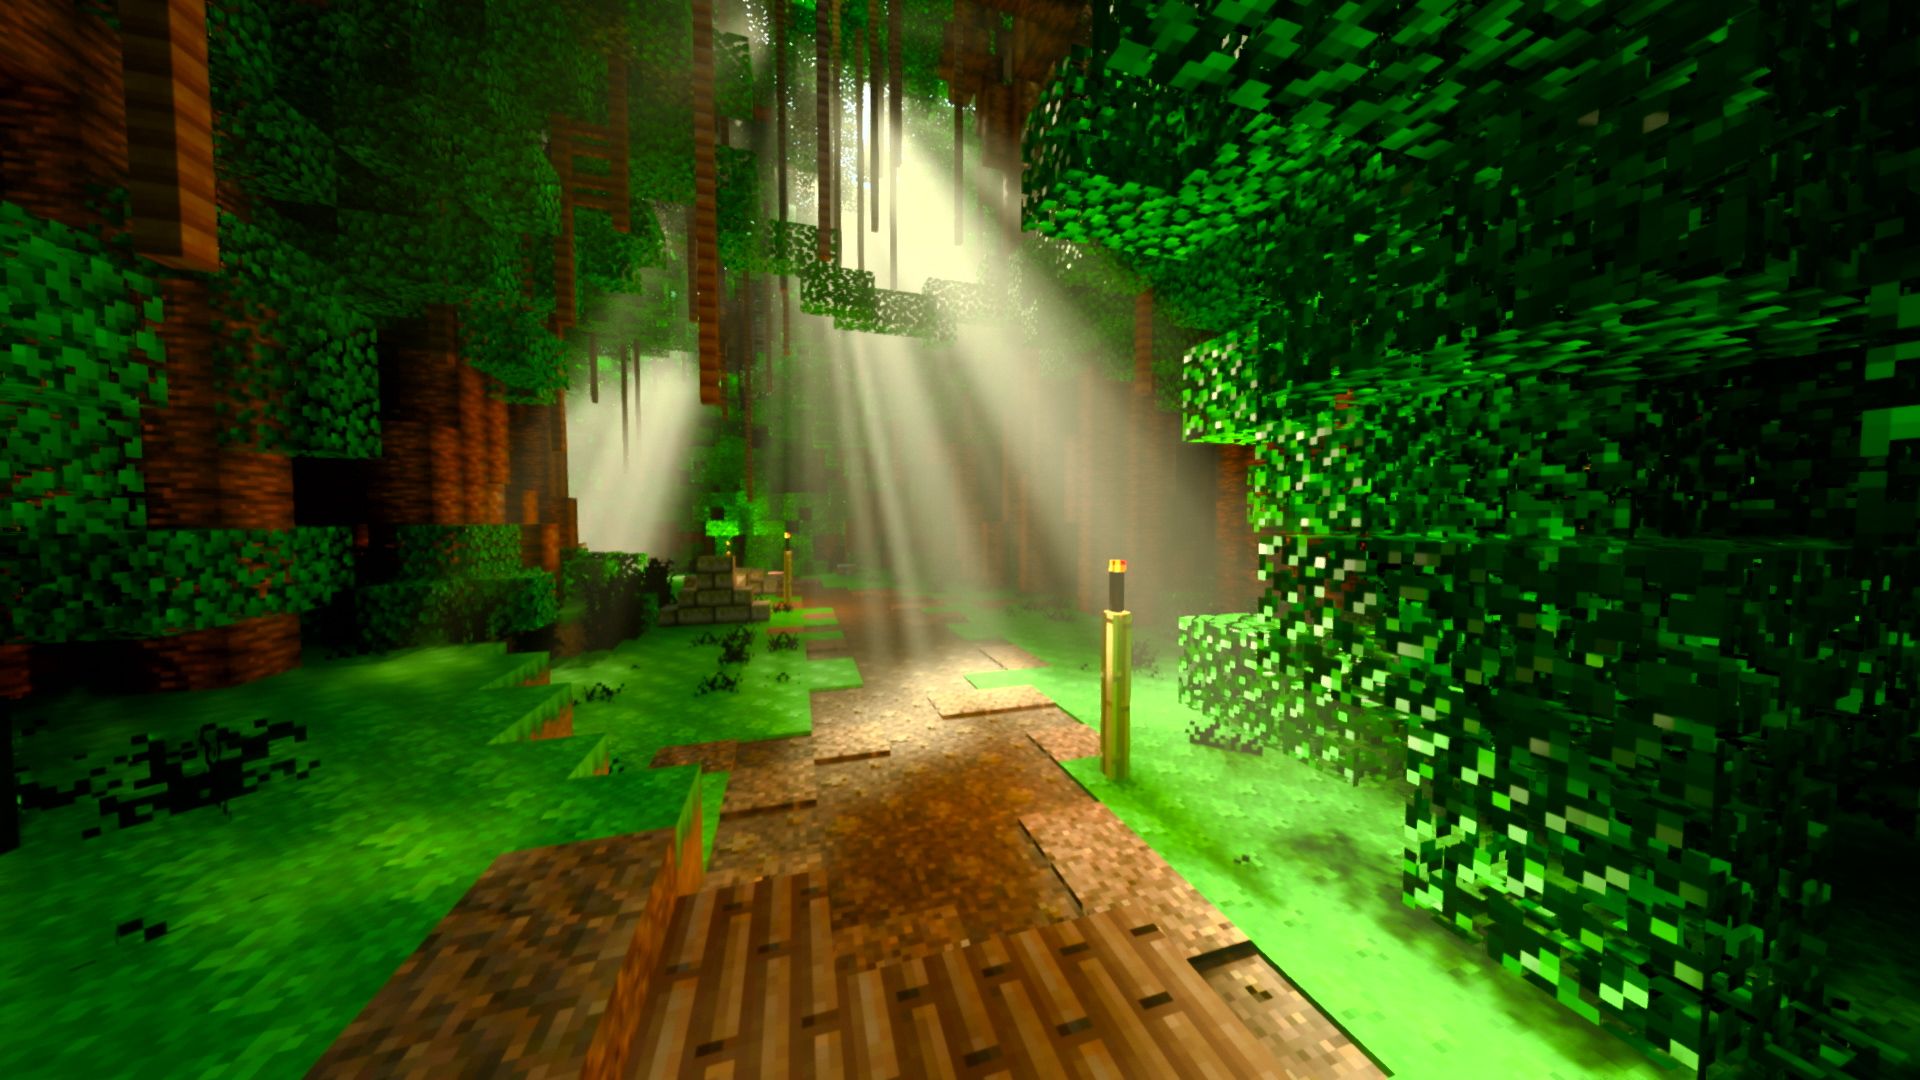 Minecraft Rtx Wallpapers Wallpaper Cave Riset